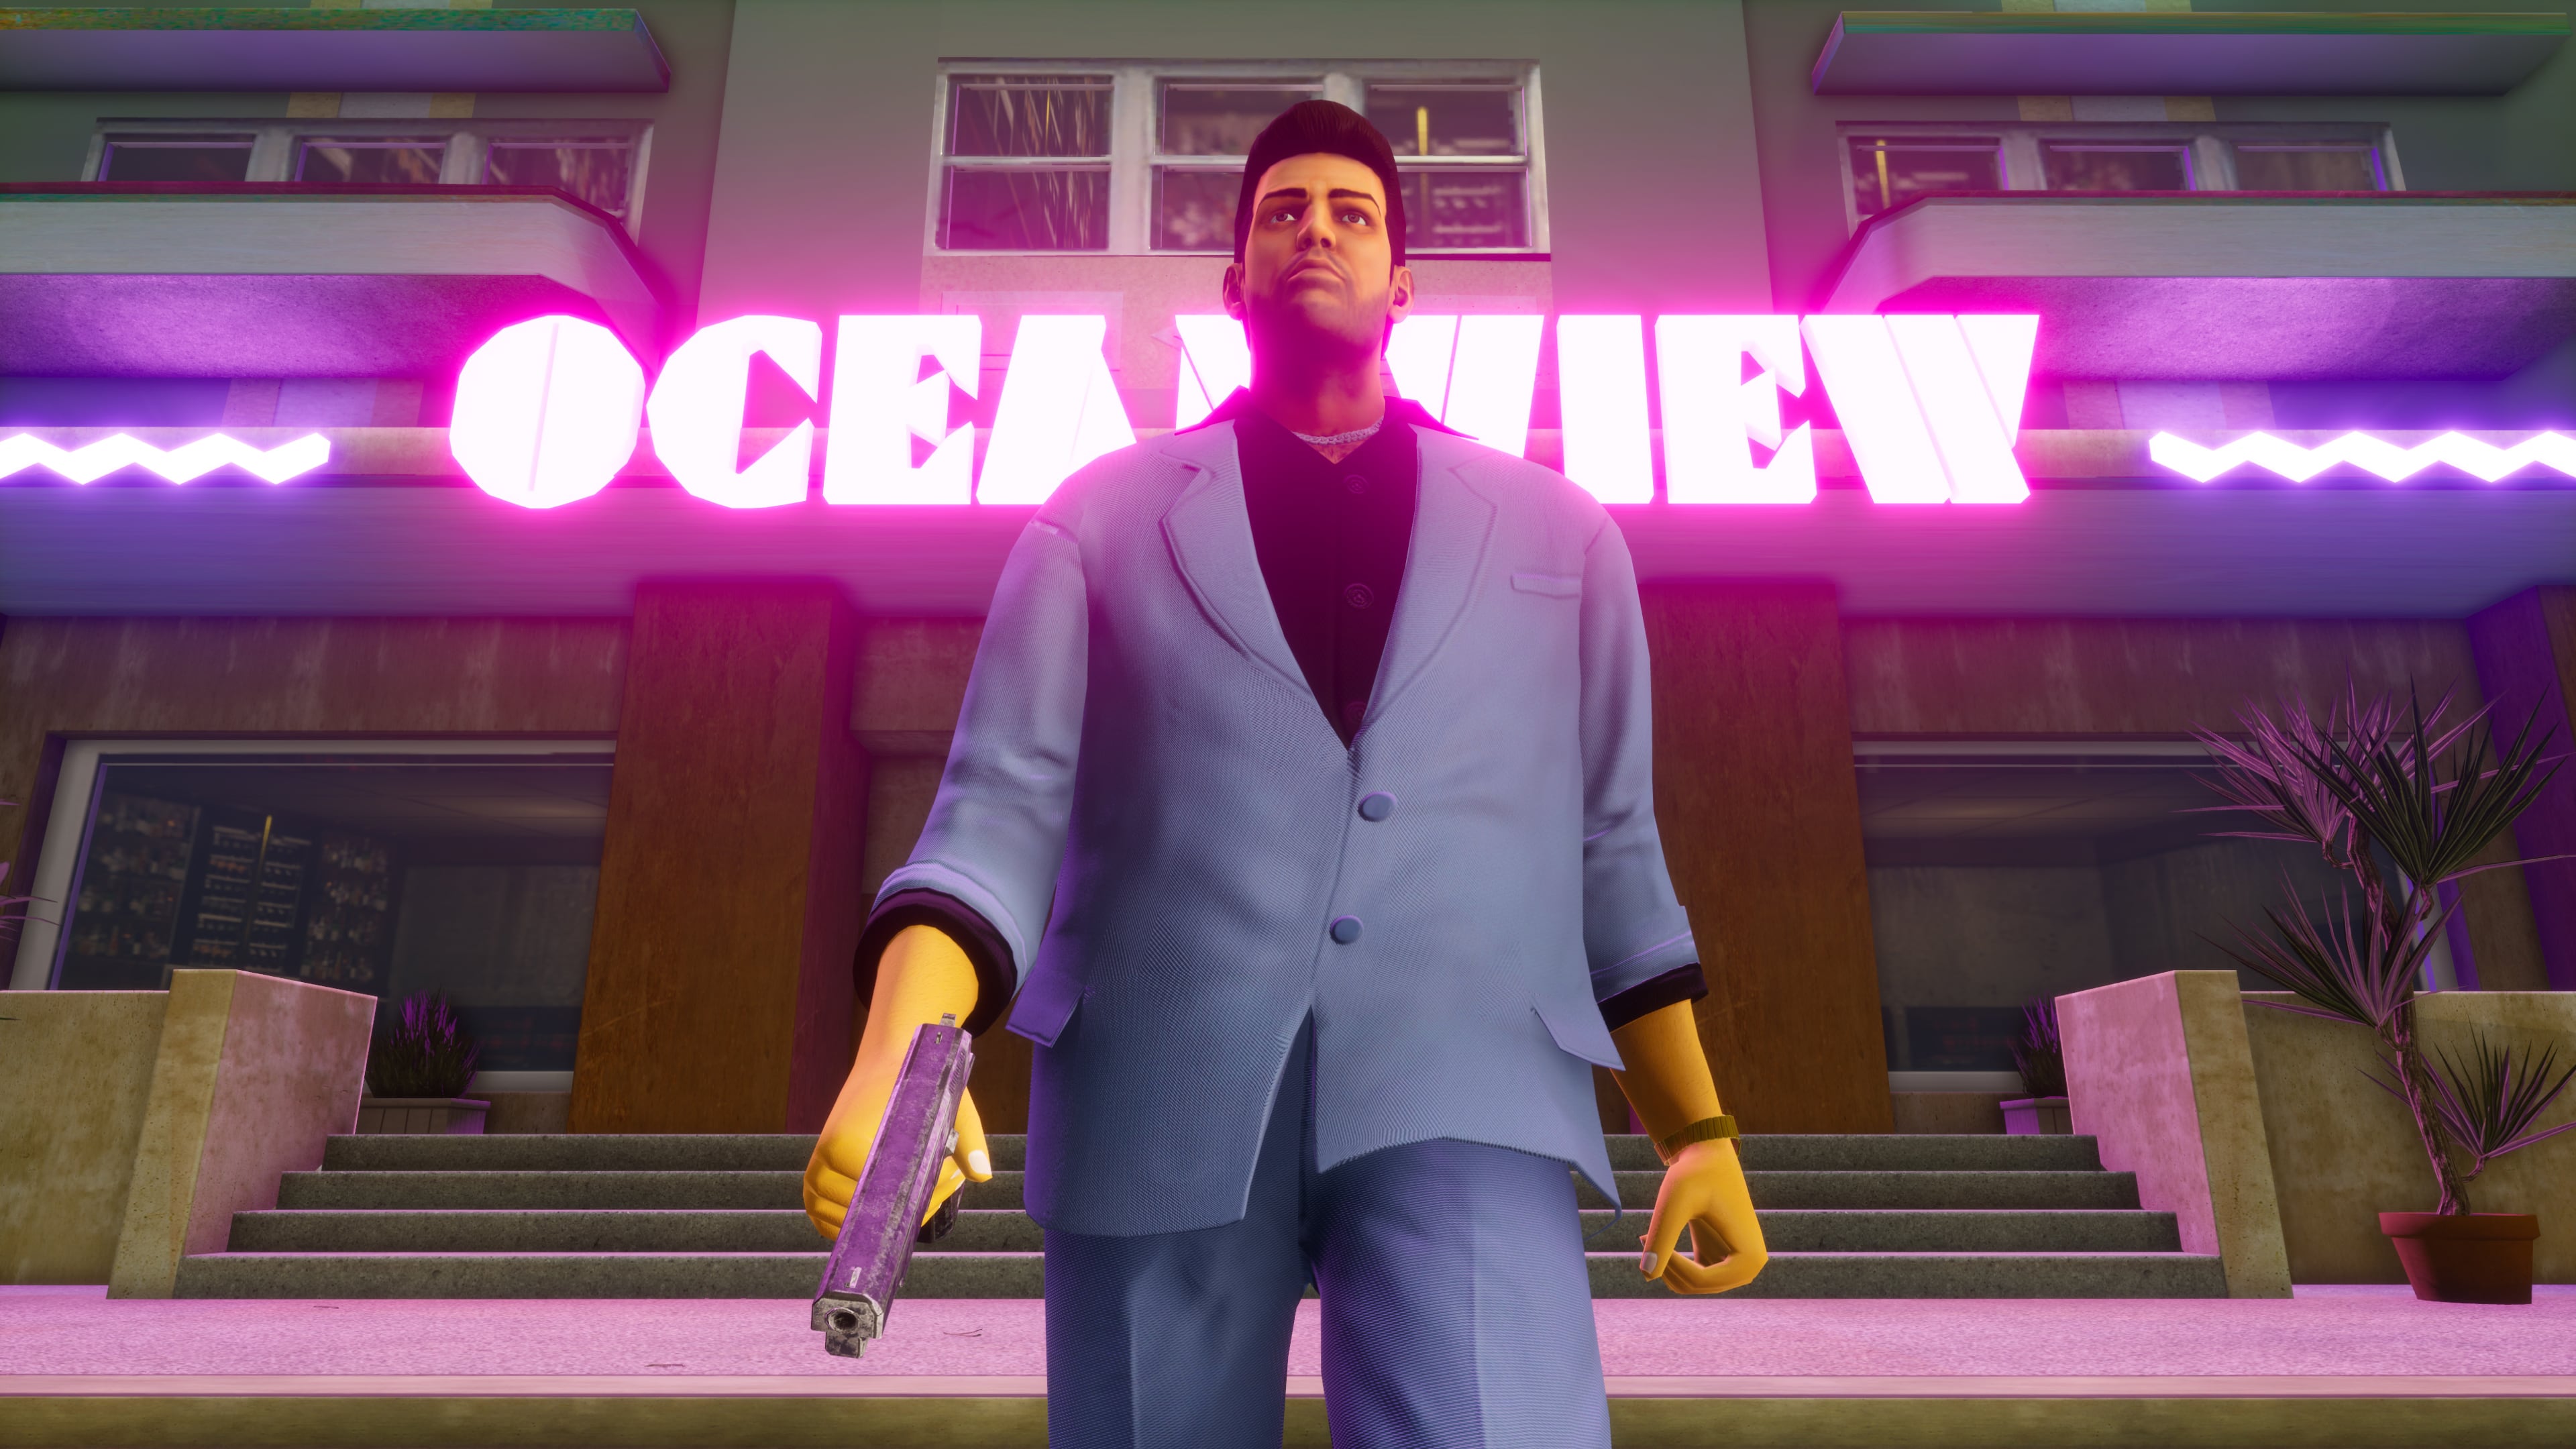 Video Game Grand Theft Auto: Vice City HD Wallpaper | Background Image